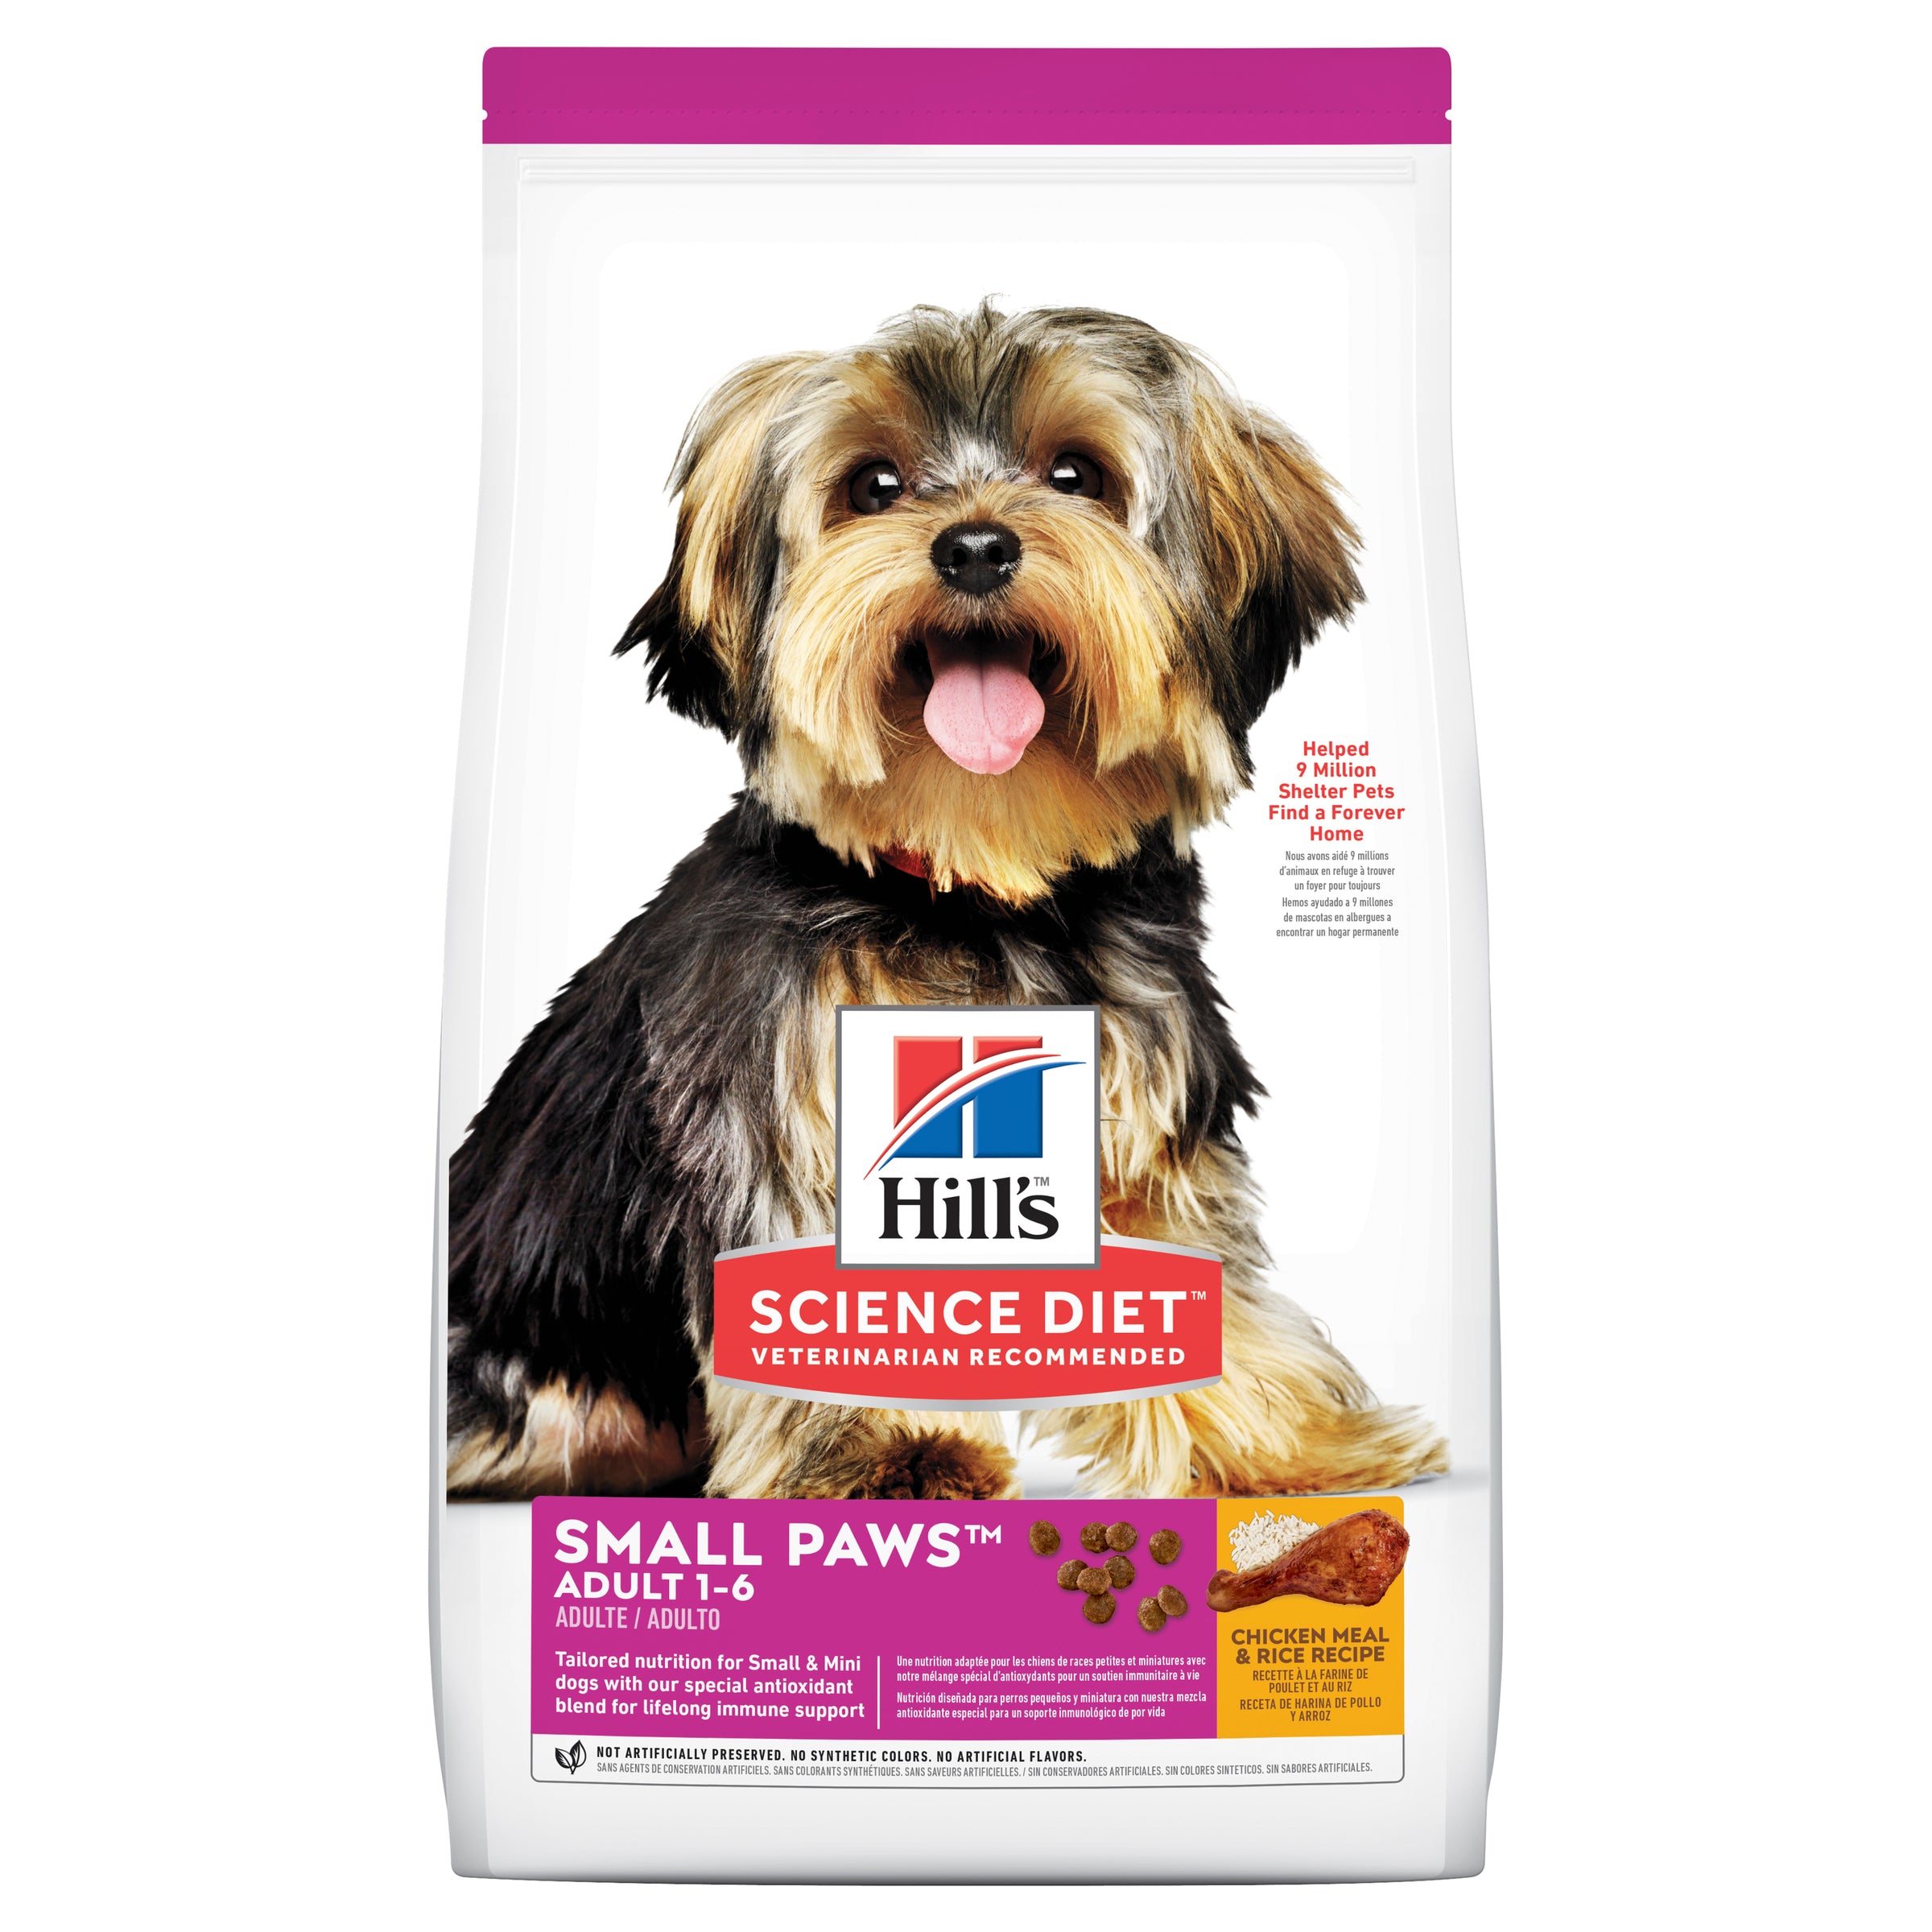 Hills Science Diet Small Paws Adult 1-6 Chicken 1.5-7.03kg